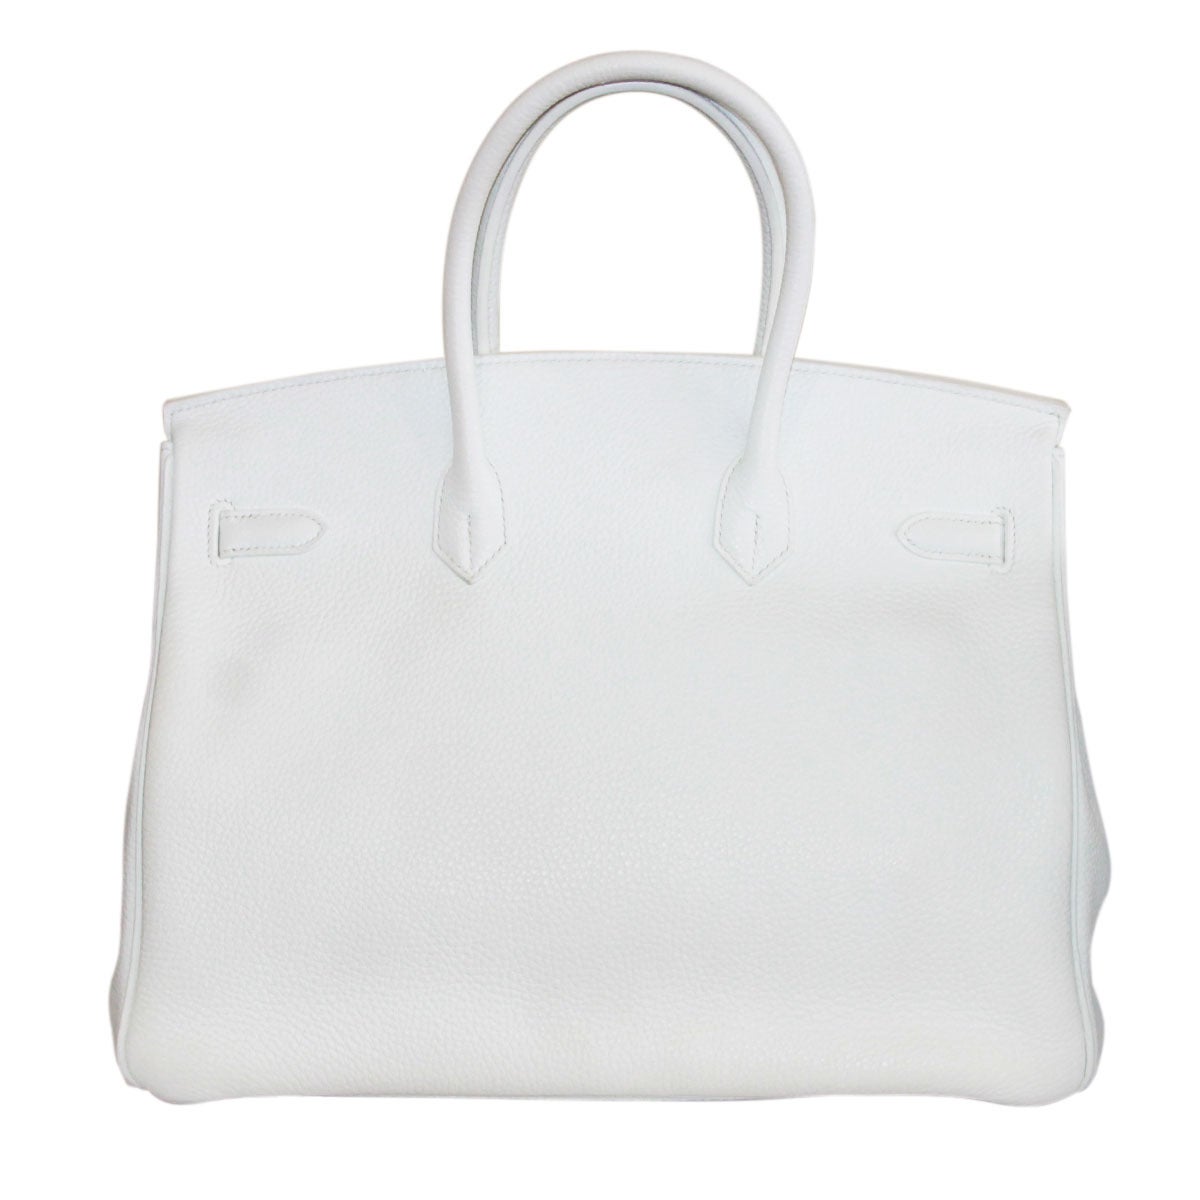 Company: Hermes
Style	: Handbag
Materials: Taurillon Clemence White Leather
Handles: Taurillon Clemence White Rolled Handles; Drop: 4.75